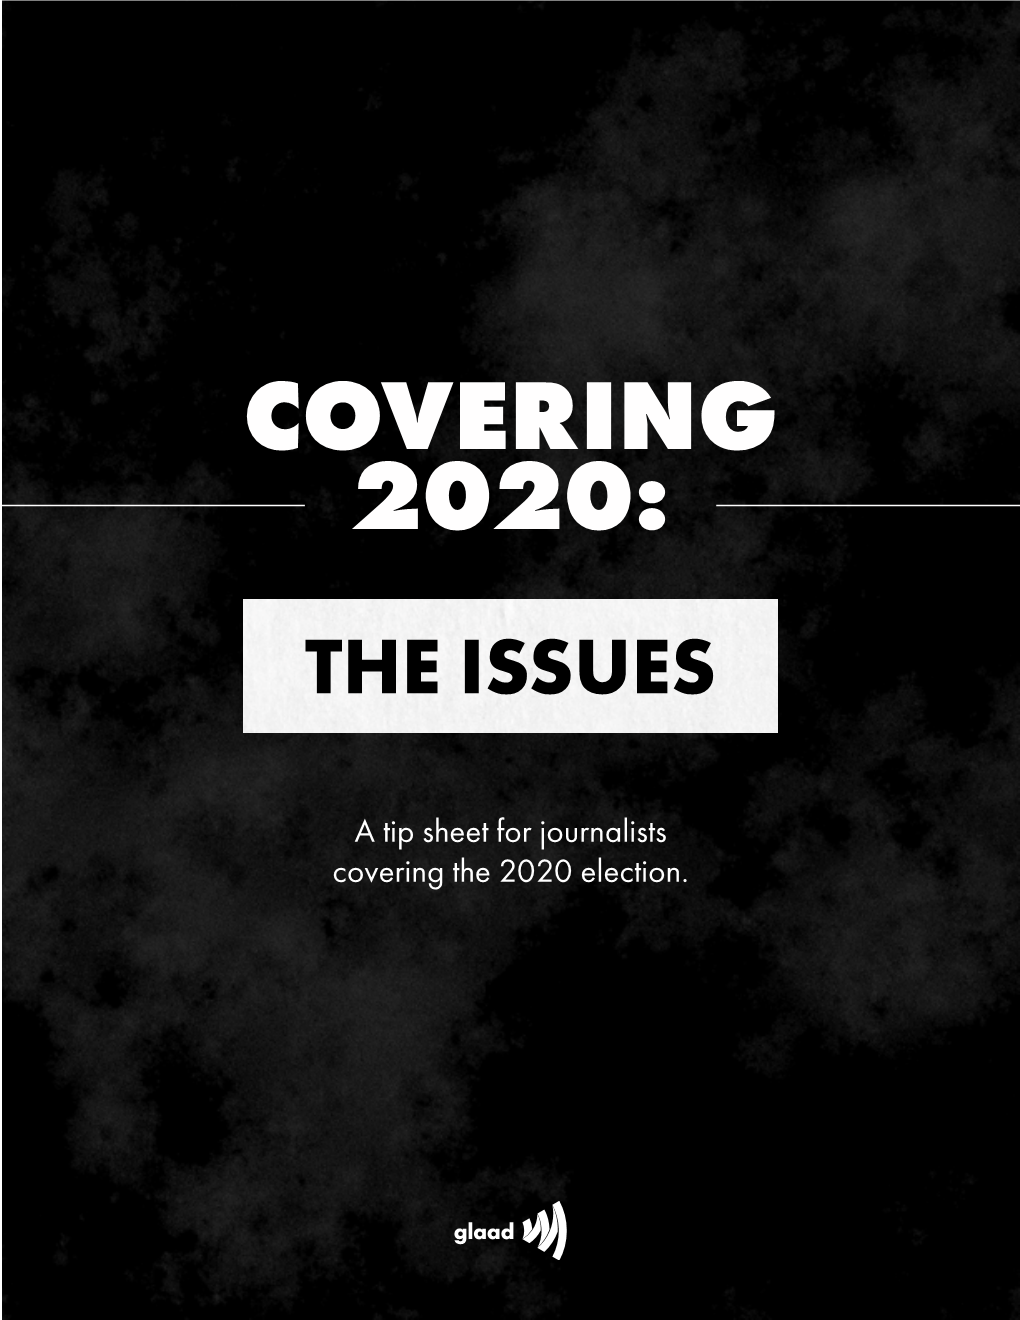 Covering 2020: the Issues